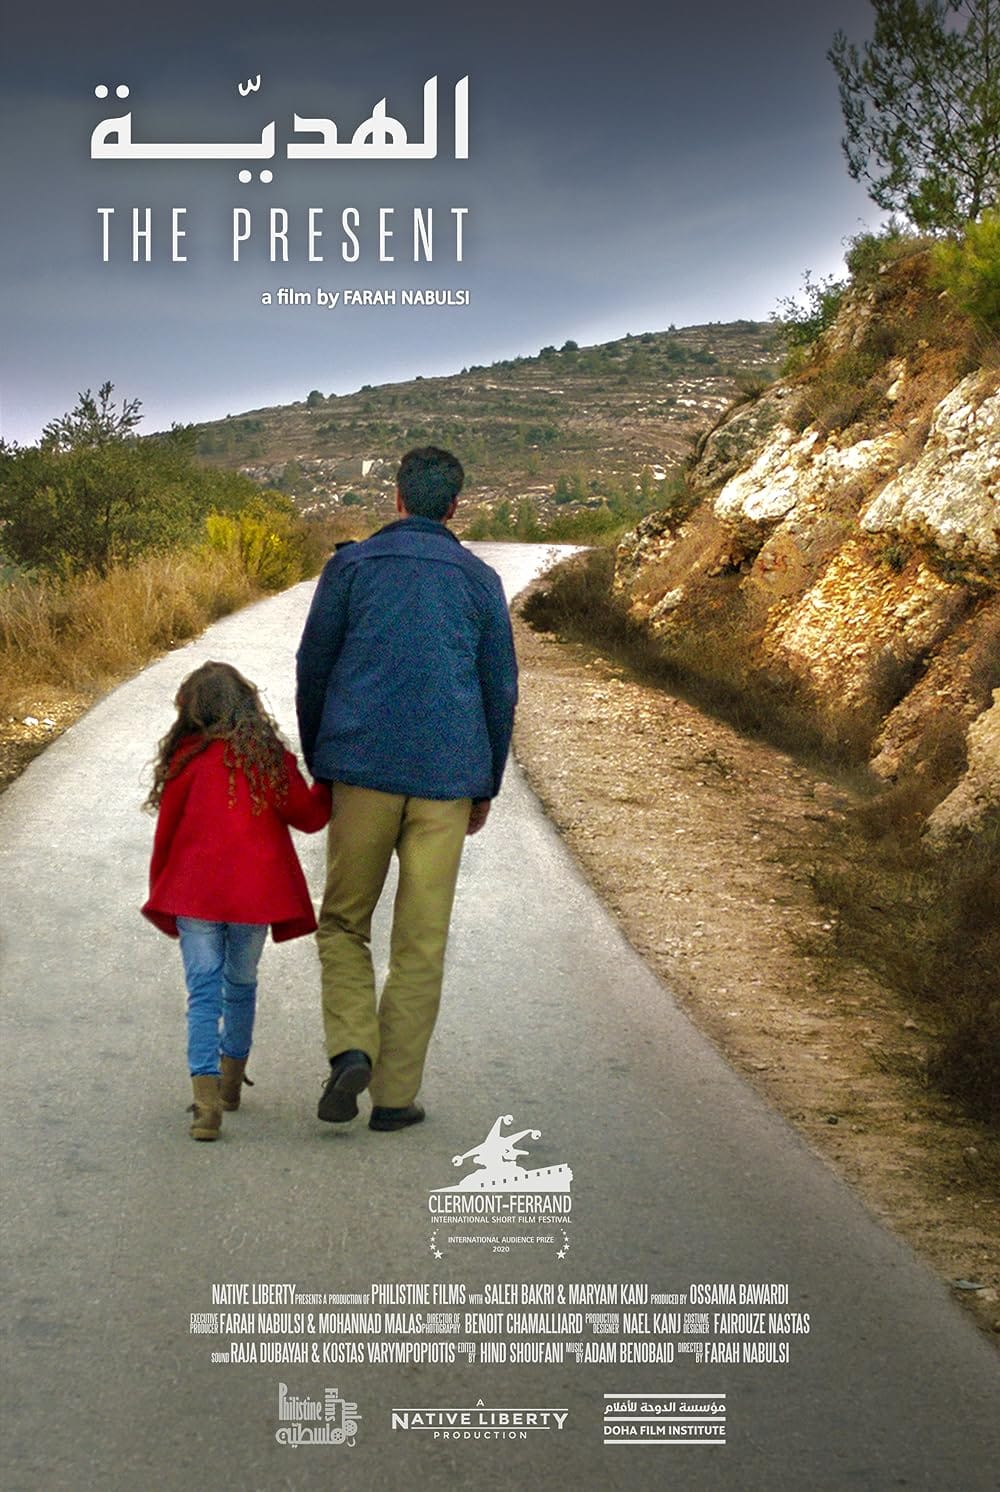 A short film that follows the ordeal of Yusef, a Palestinian father who tries to buy a gift for his wife's anniversary with his young daughter, but faces obstacles and humiliation at the Israeli checkpoints